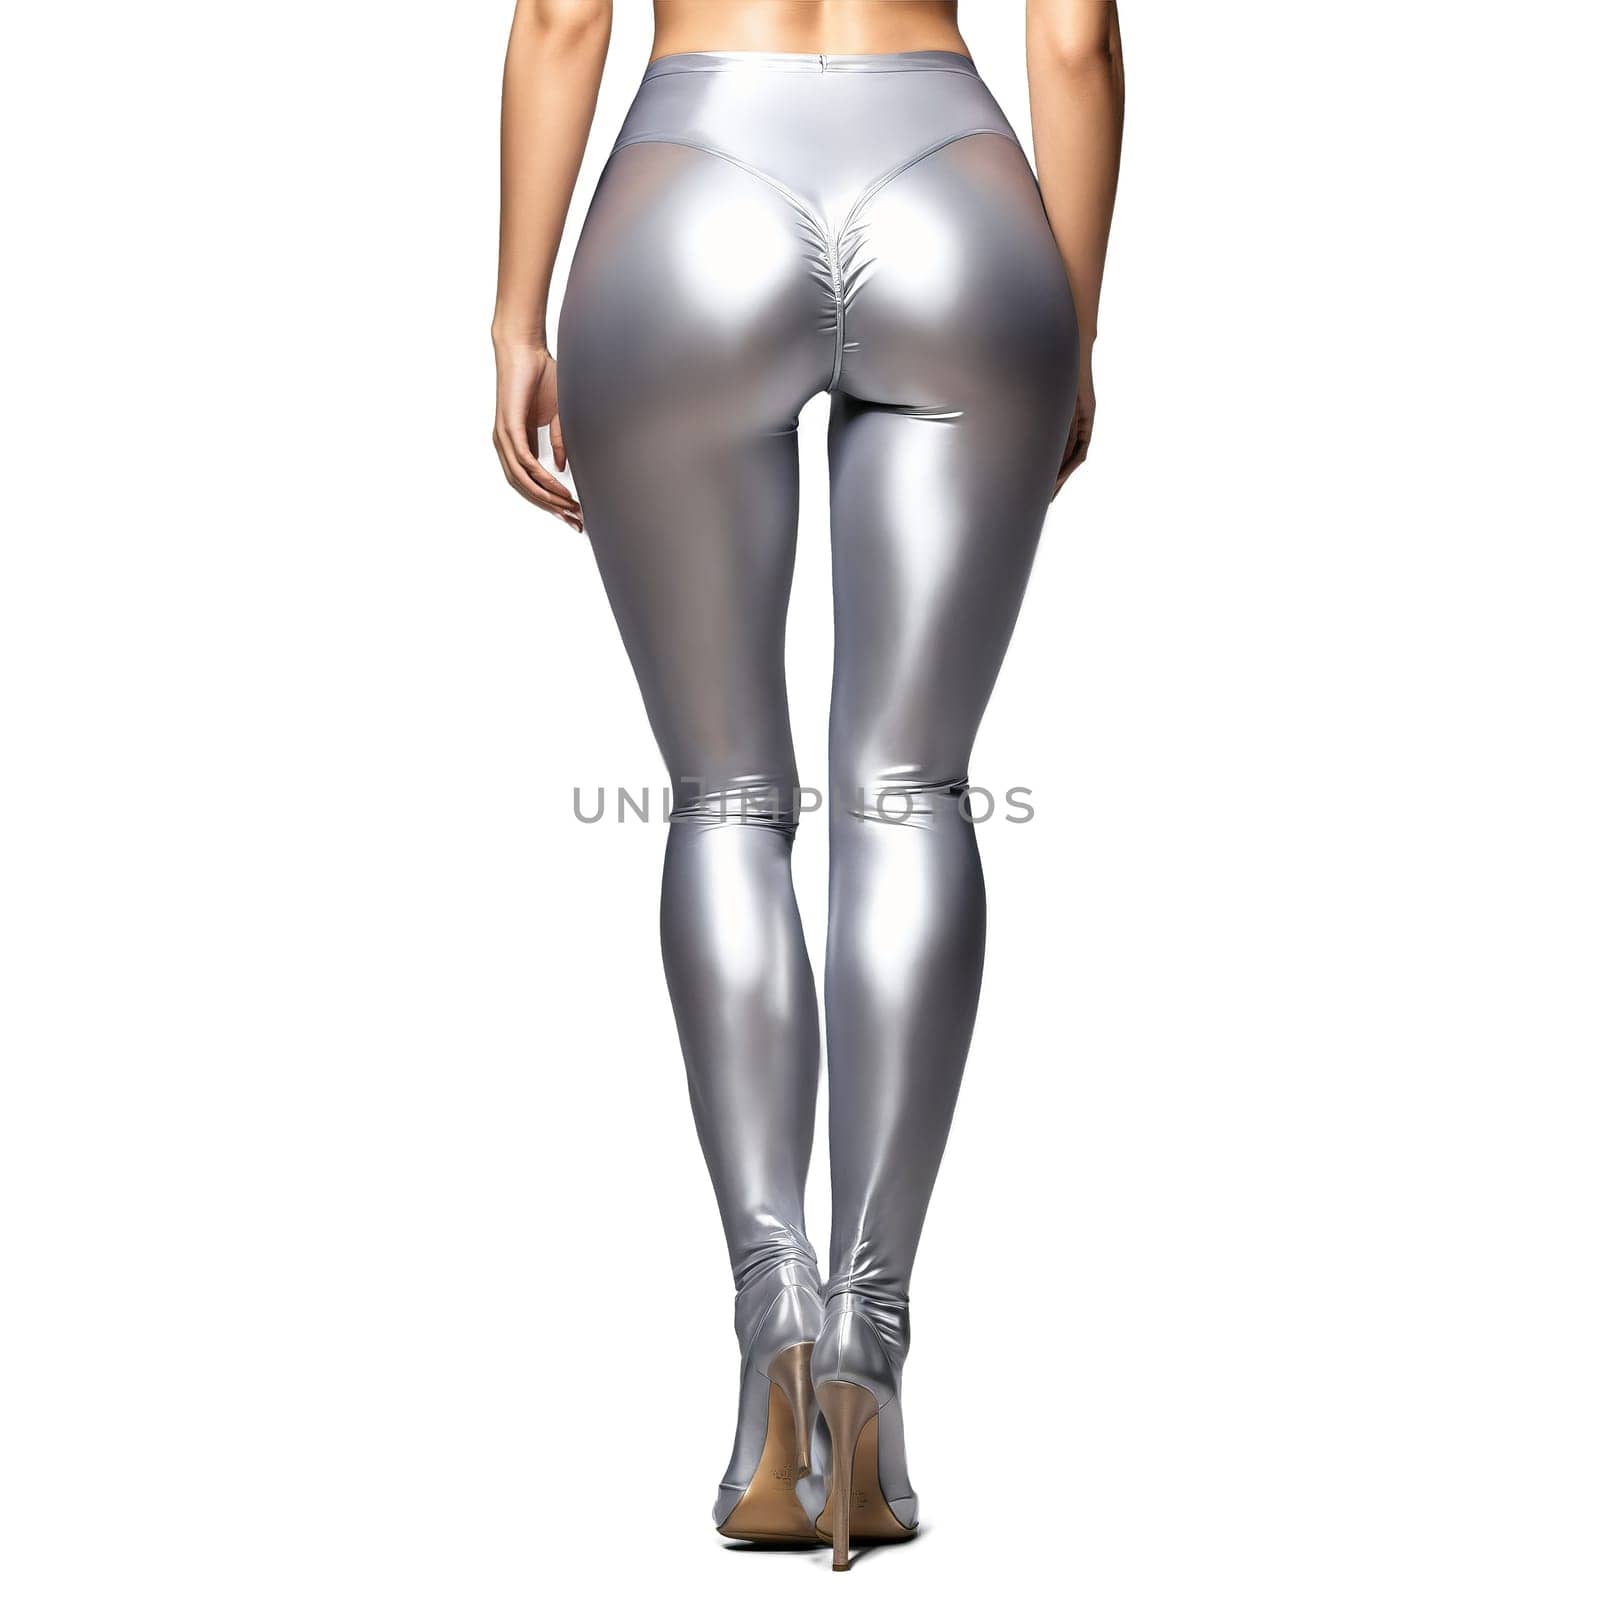 Shimmery silver tights Toned woman s legs in shimmery silver tights matched with a sleek by panophotograph